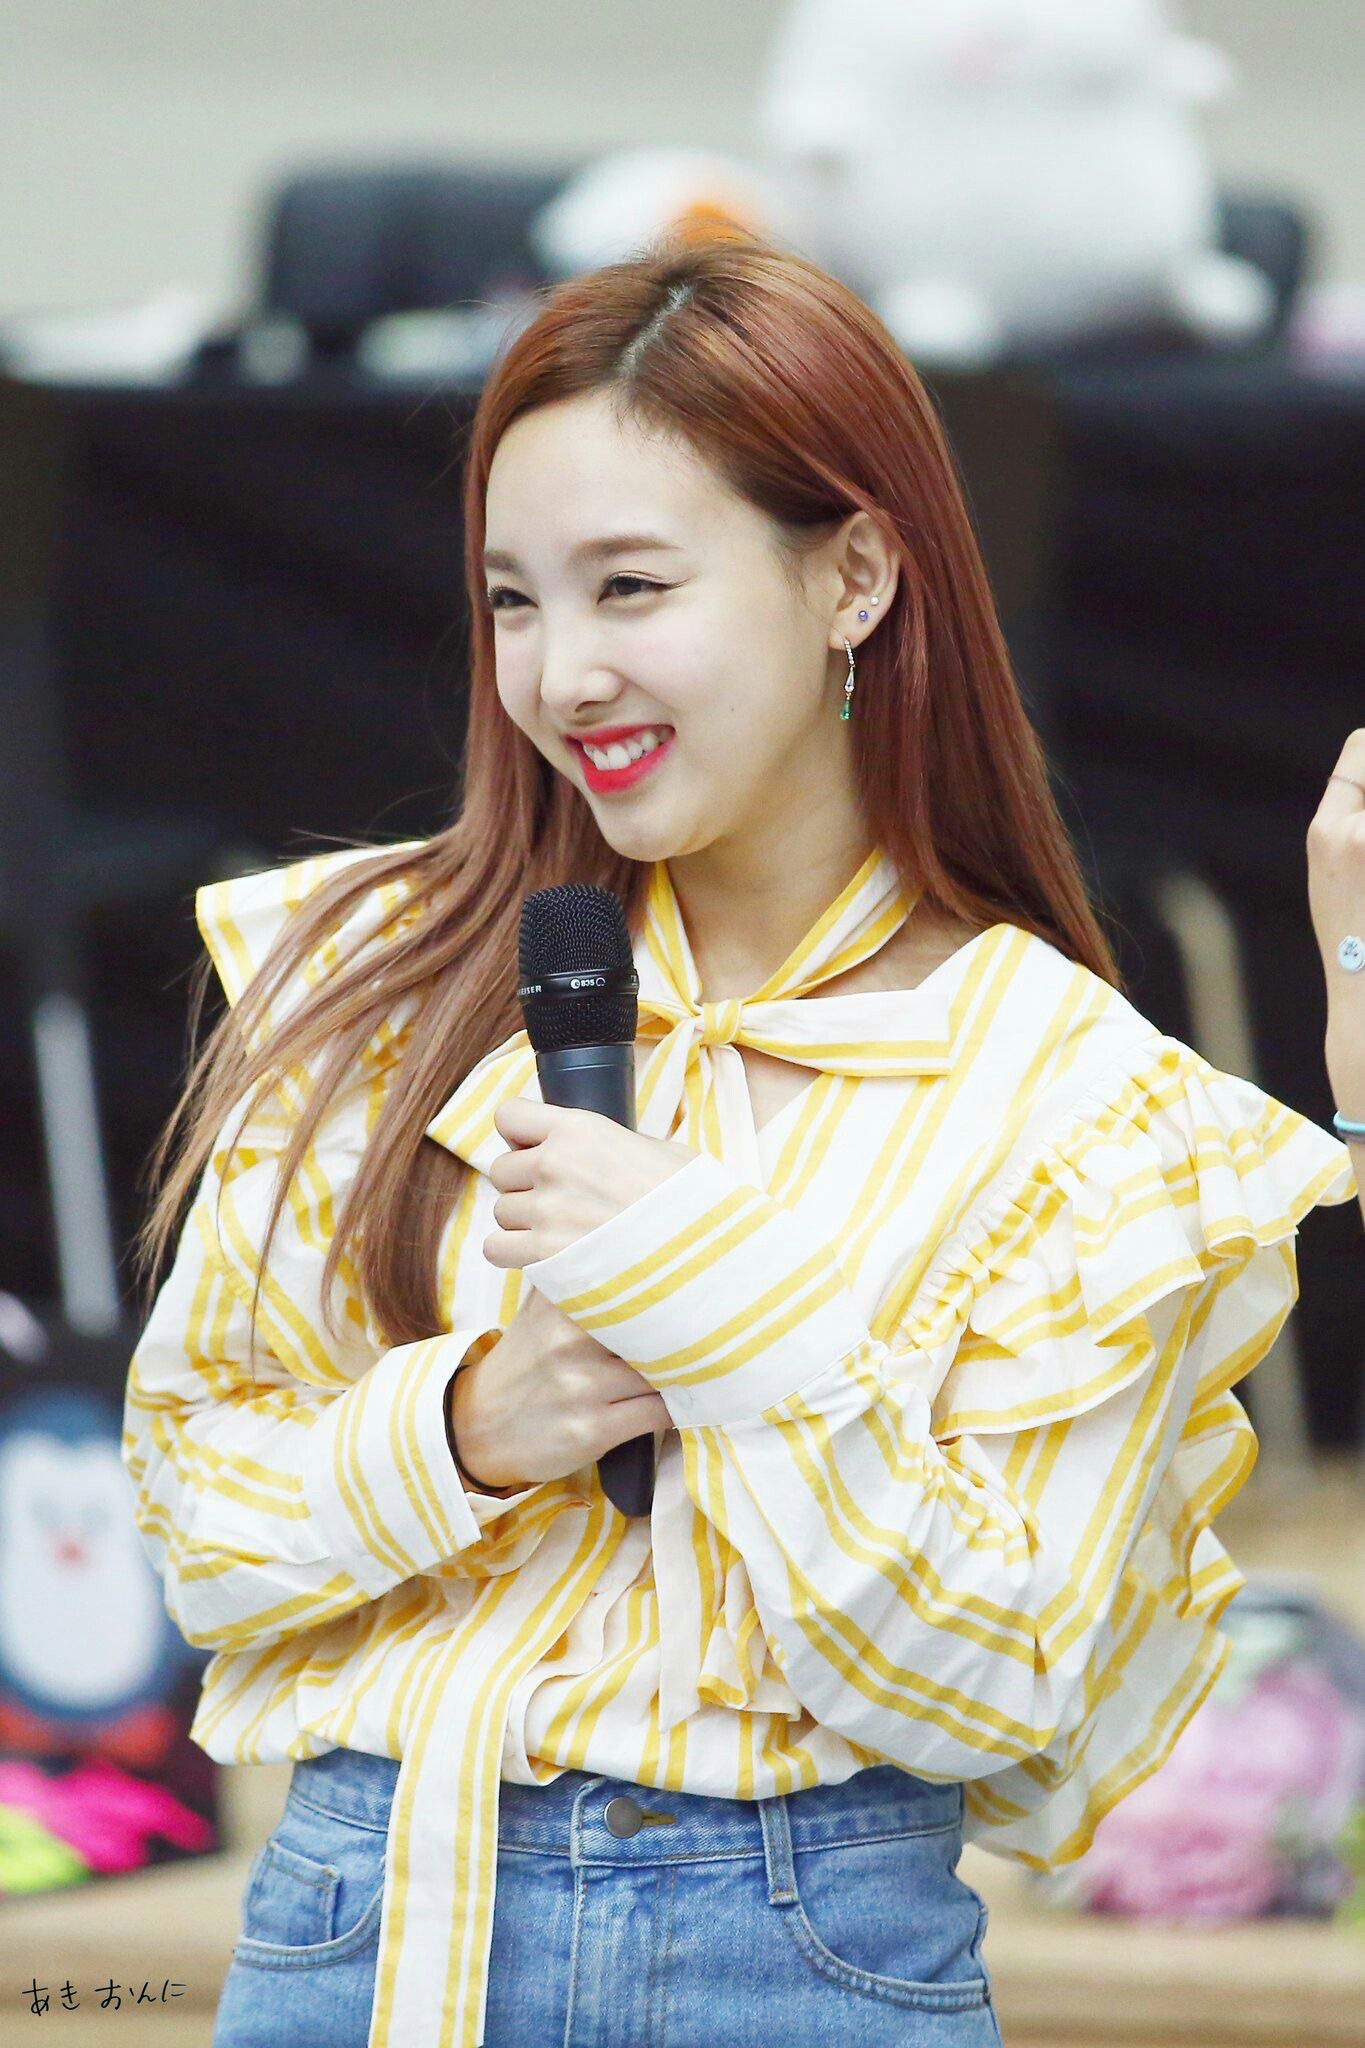 Solid Proof That TWICE’s Nayeon Looks Amazing In Every Color Of The ...